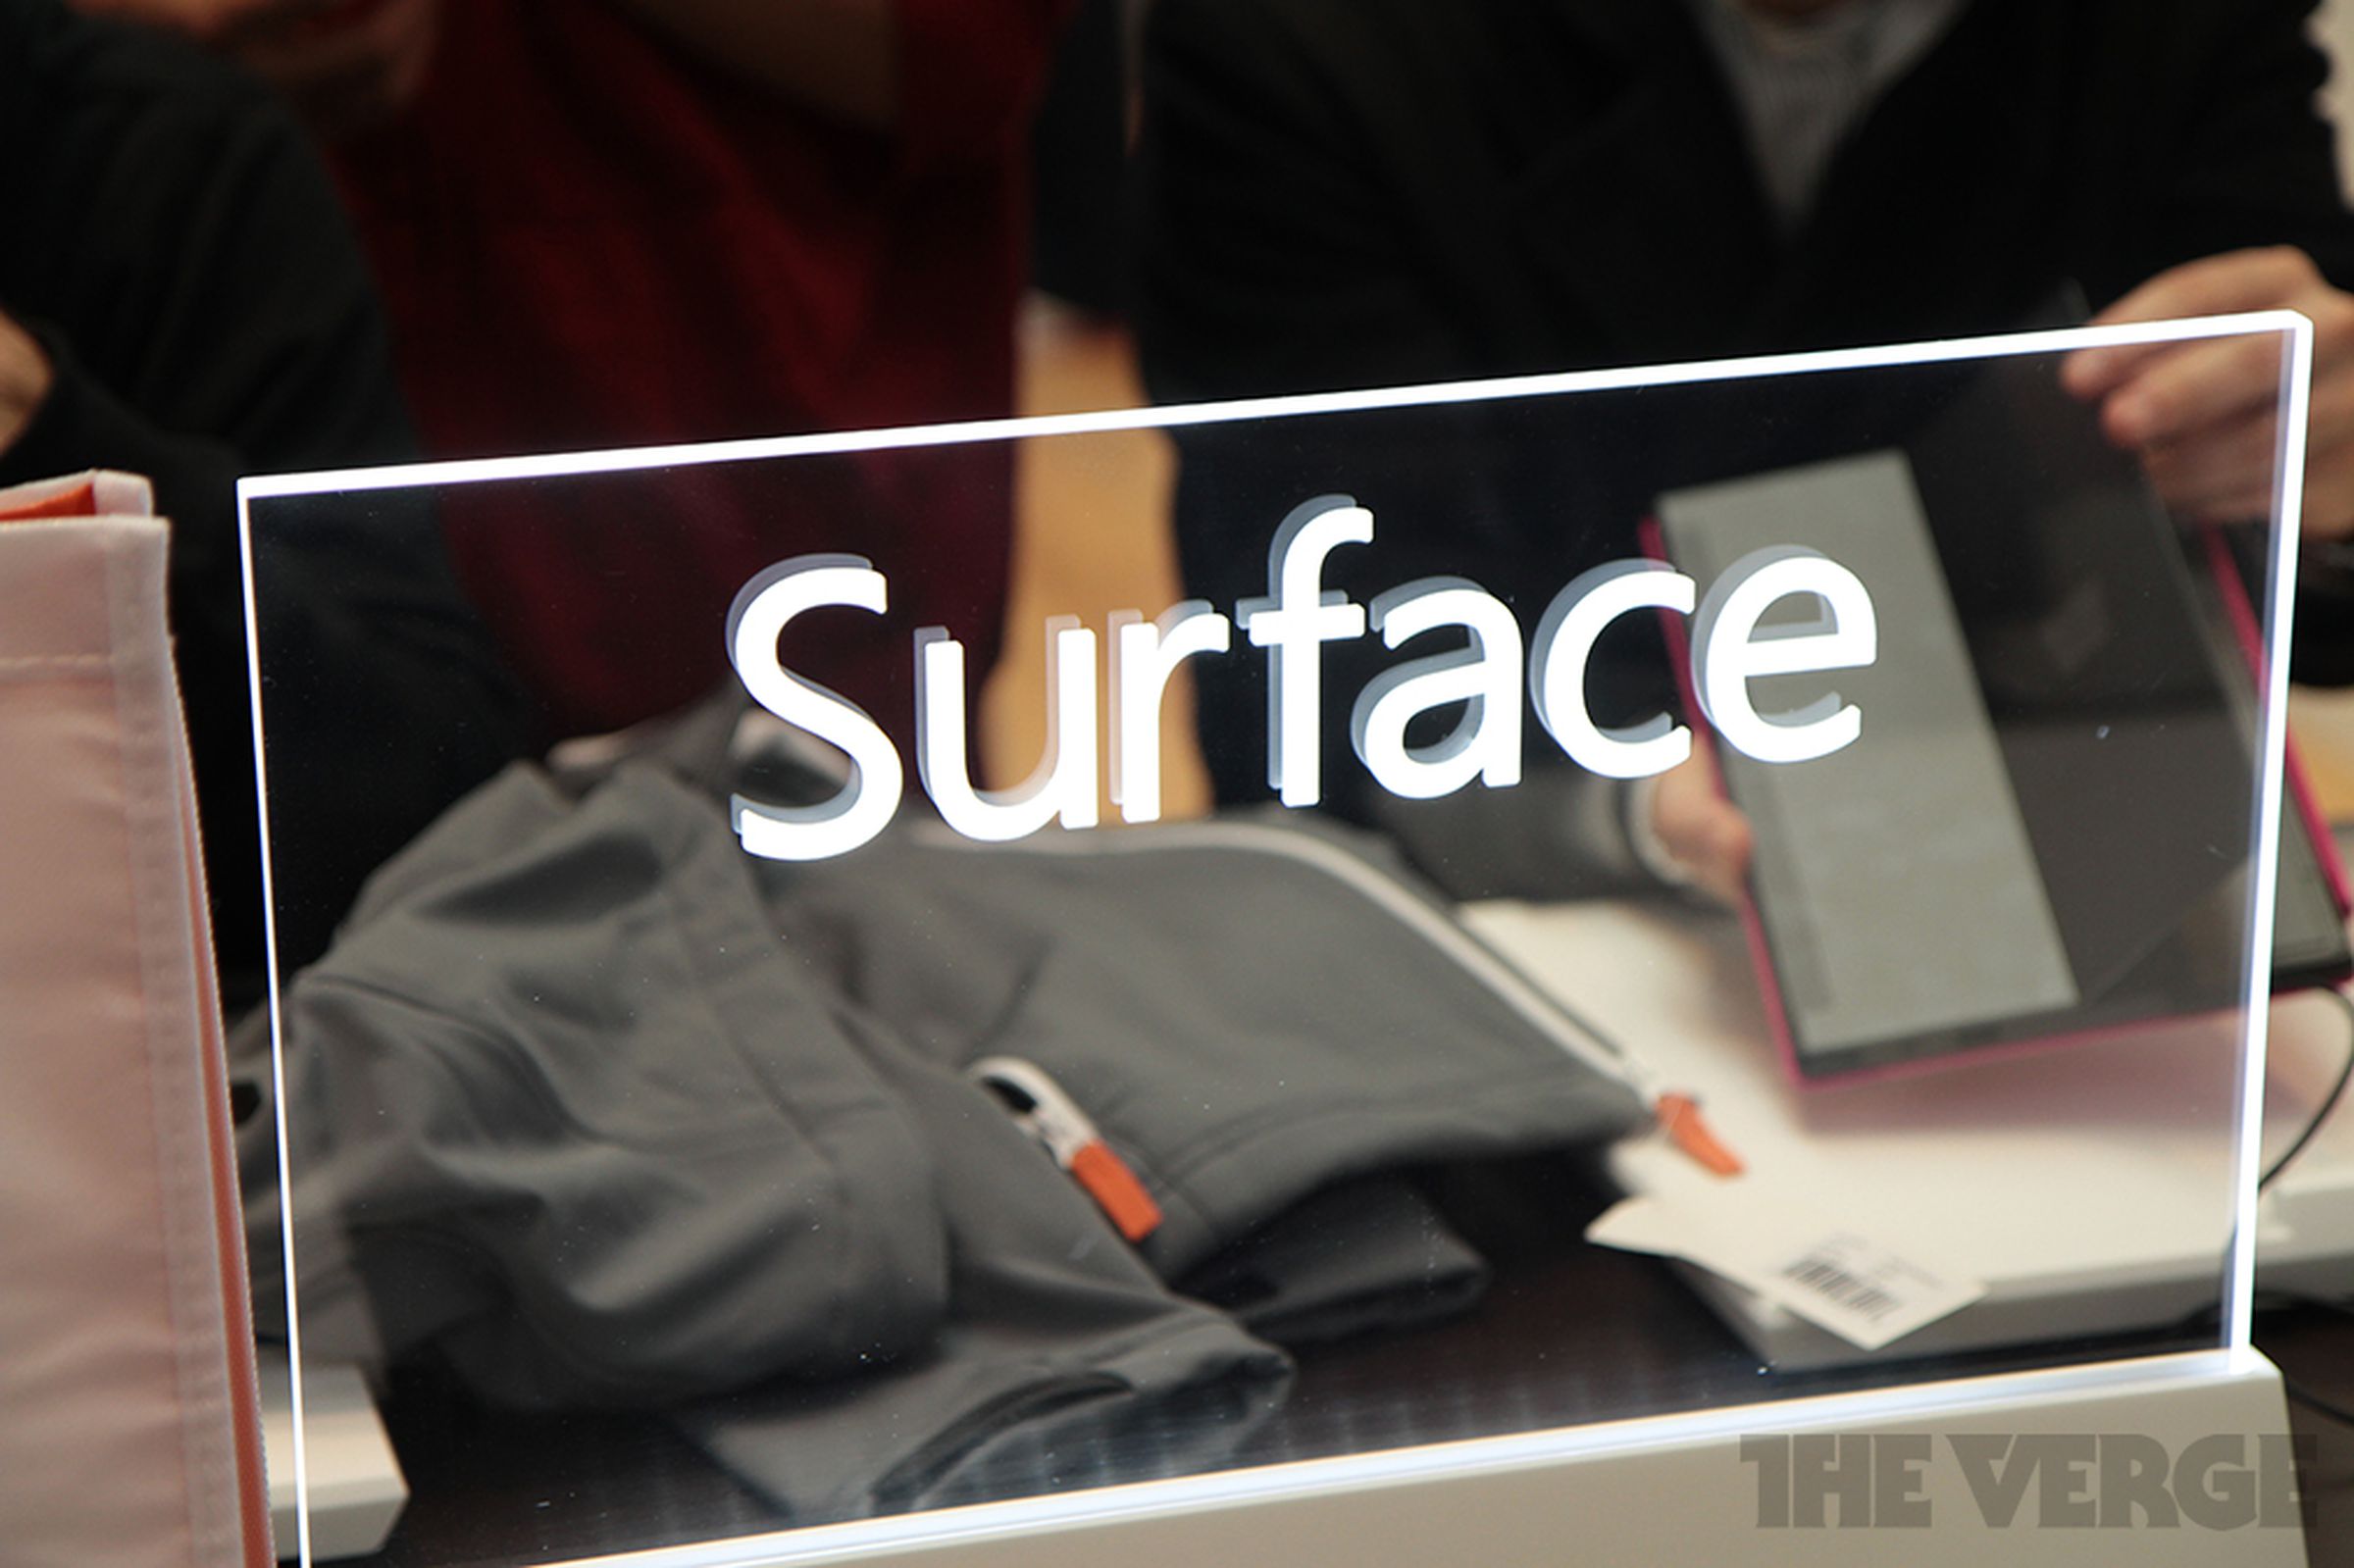 Microsoft Surface launch pictures